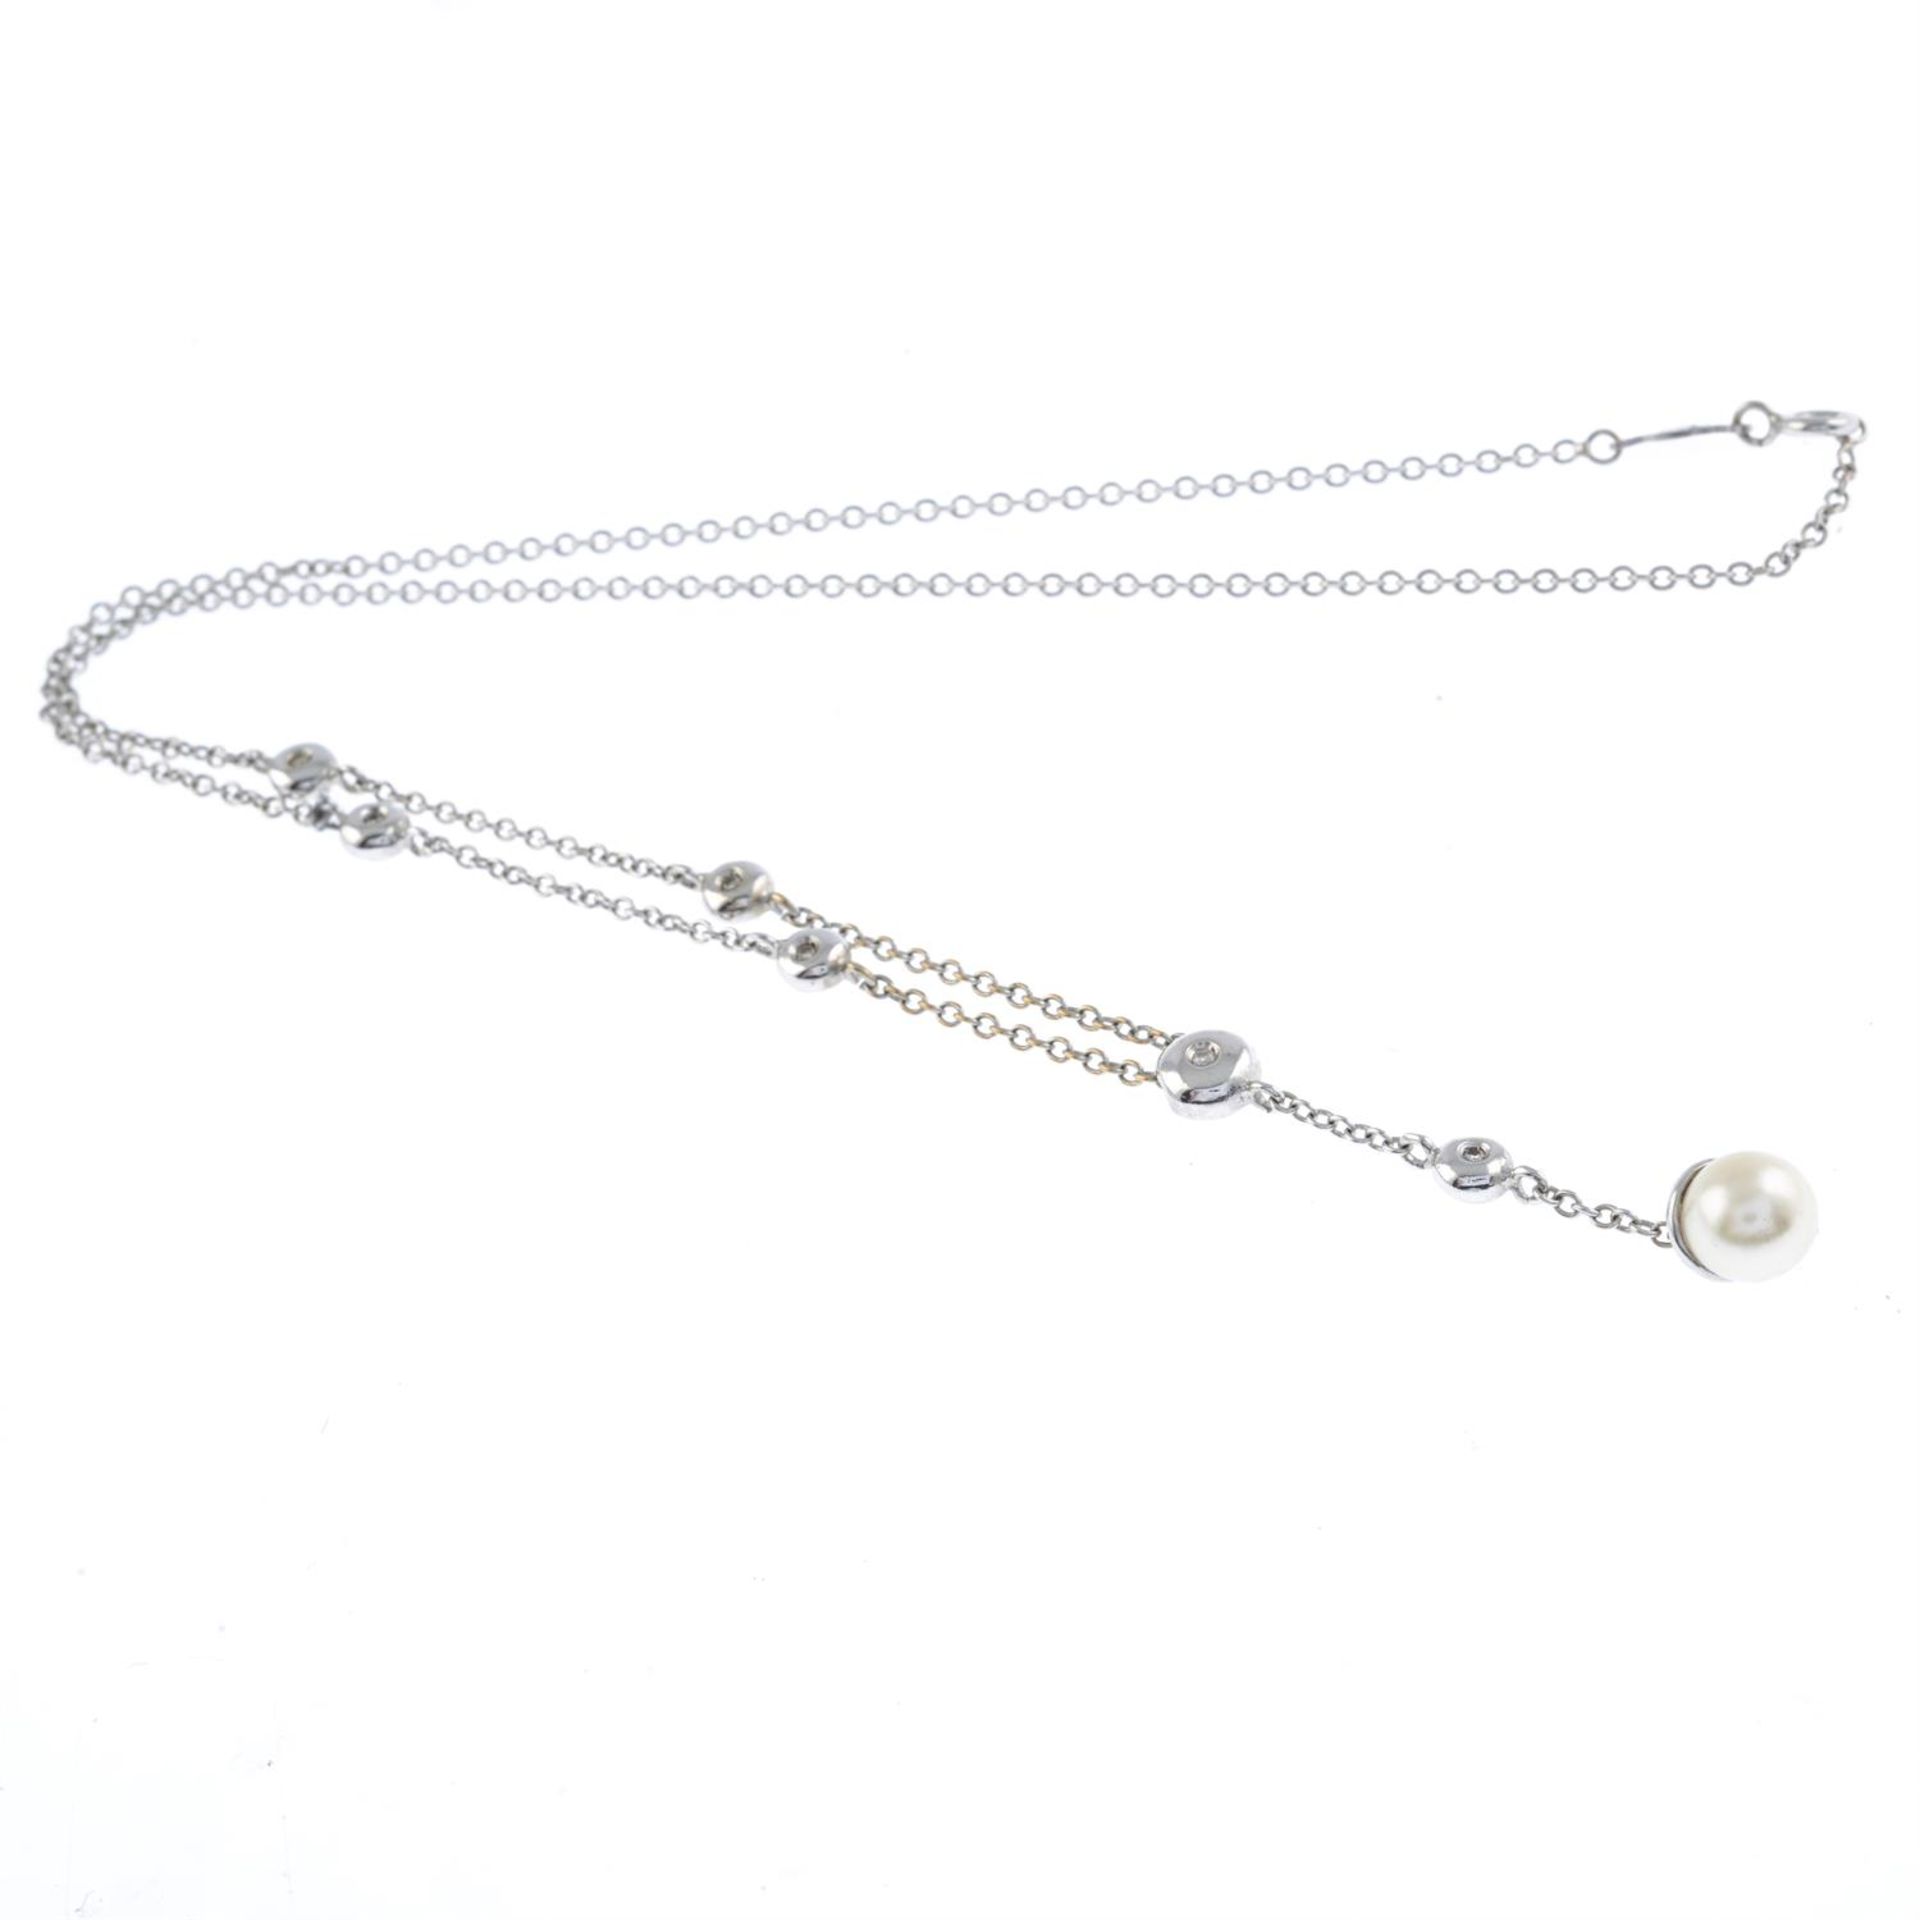 18ct gold cultured pearl & diamond necklace - Image 2 of 2